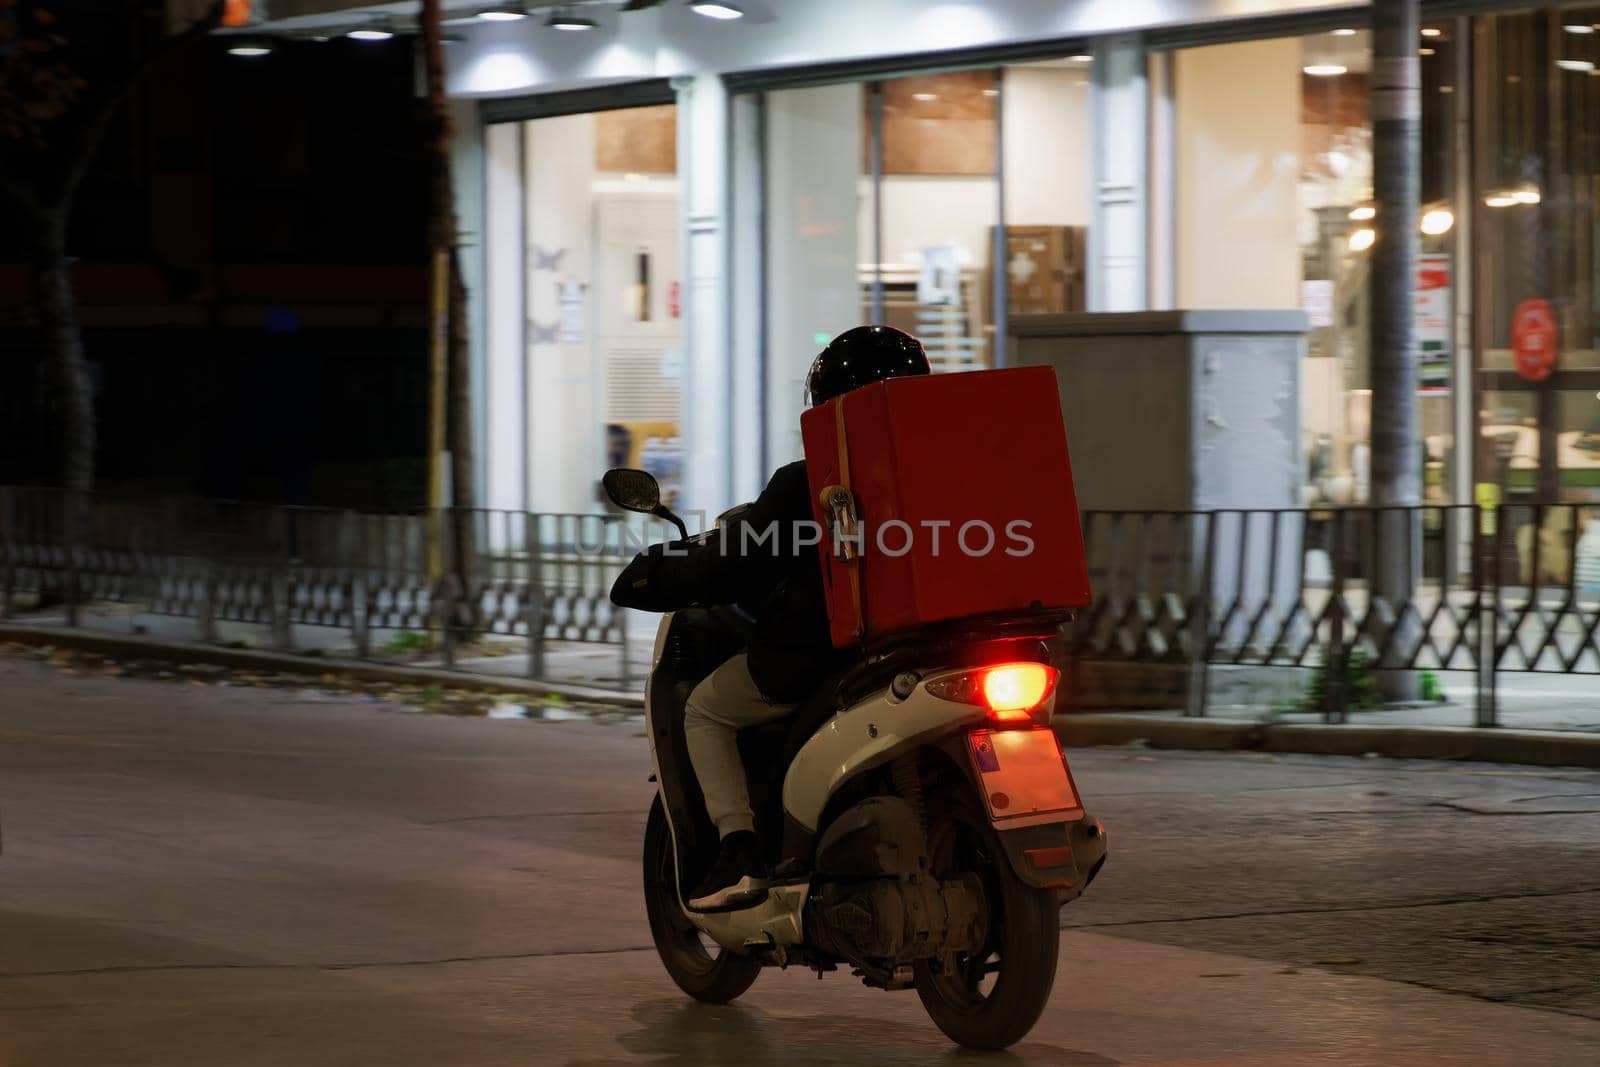 Illuminated view of male with helmet riding motorcycle to deliver take away food contained on a red box in Thessaloniki, Greece.